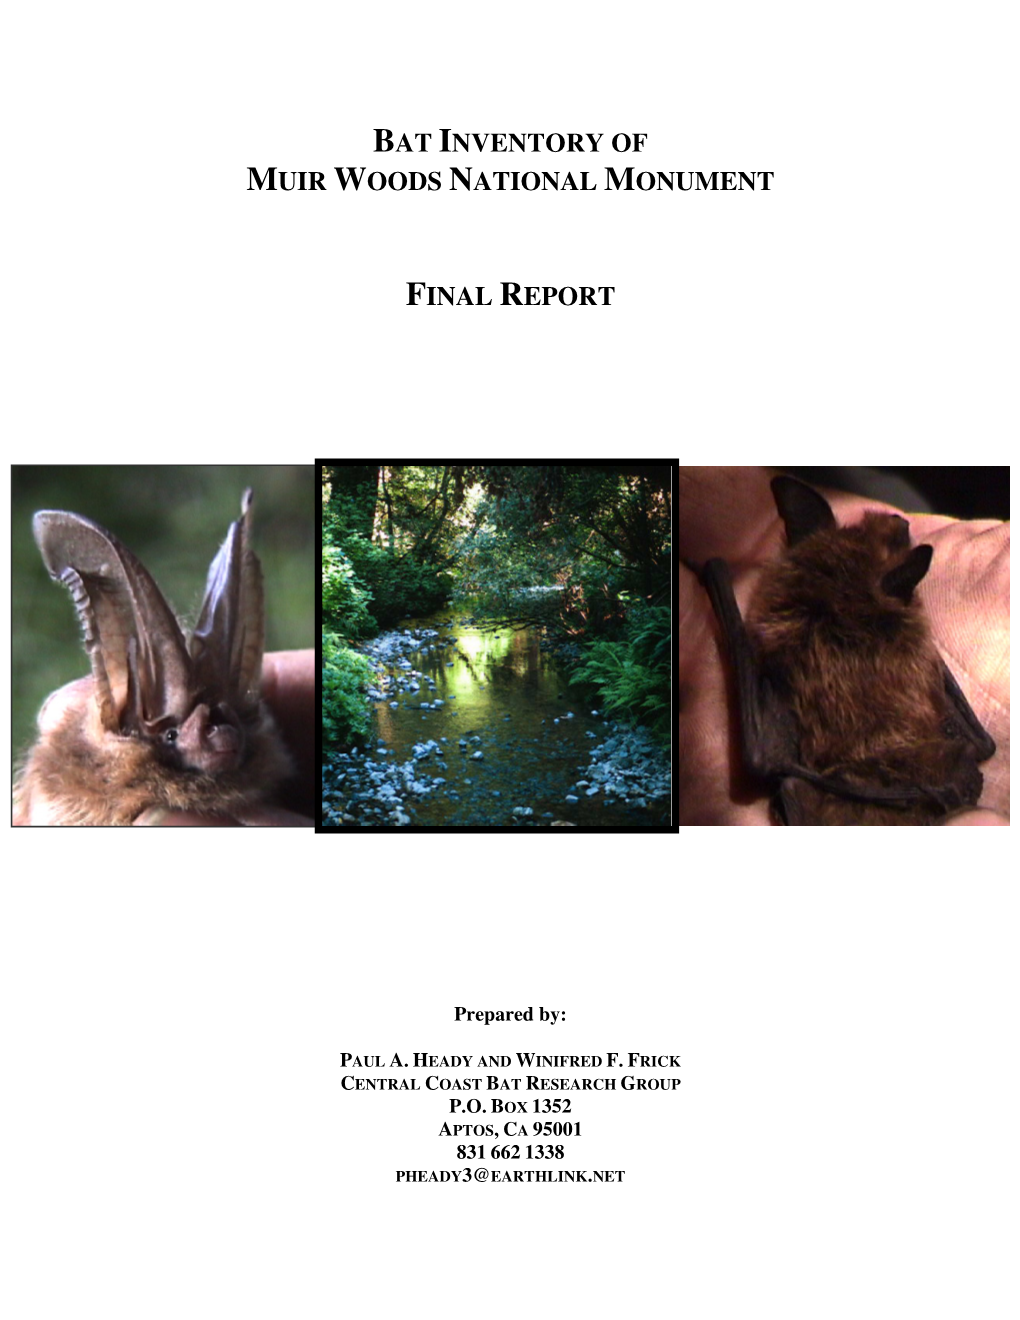 Bat Inventory of Muir Woods National Monument